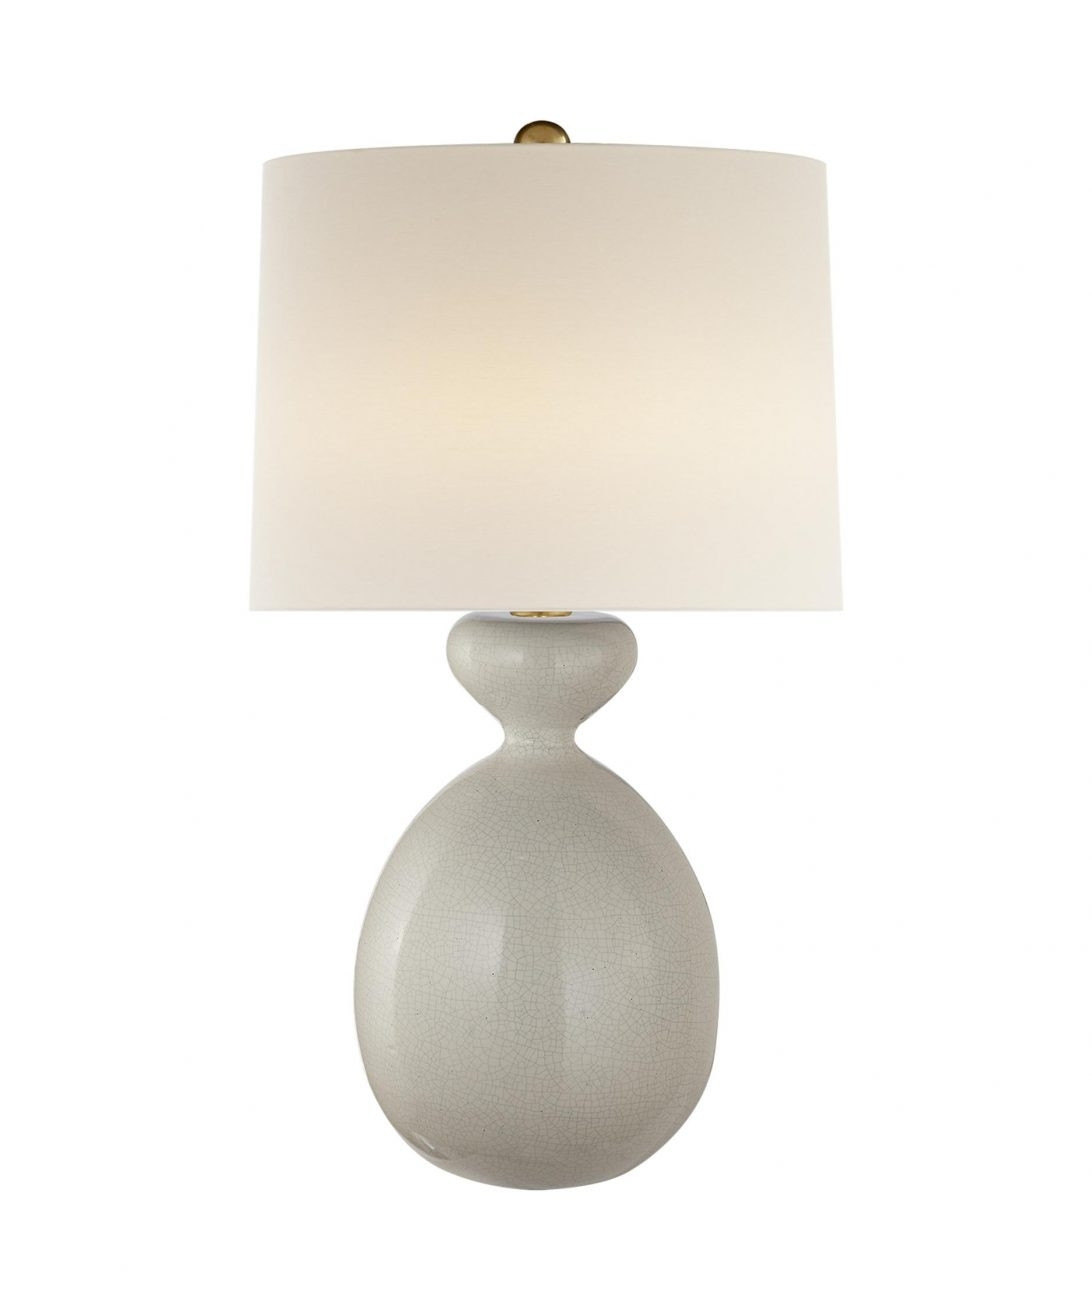 Cheap Living Room Lamps
 15 Inspirations of Table Lamps for Living Room